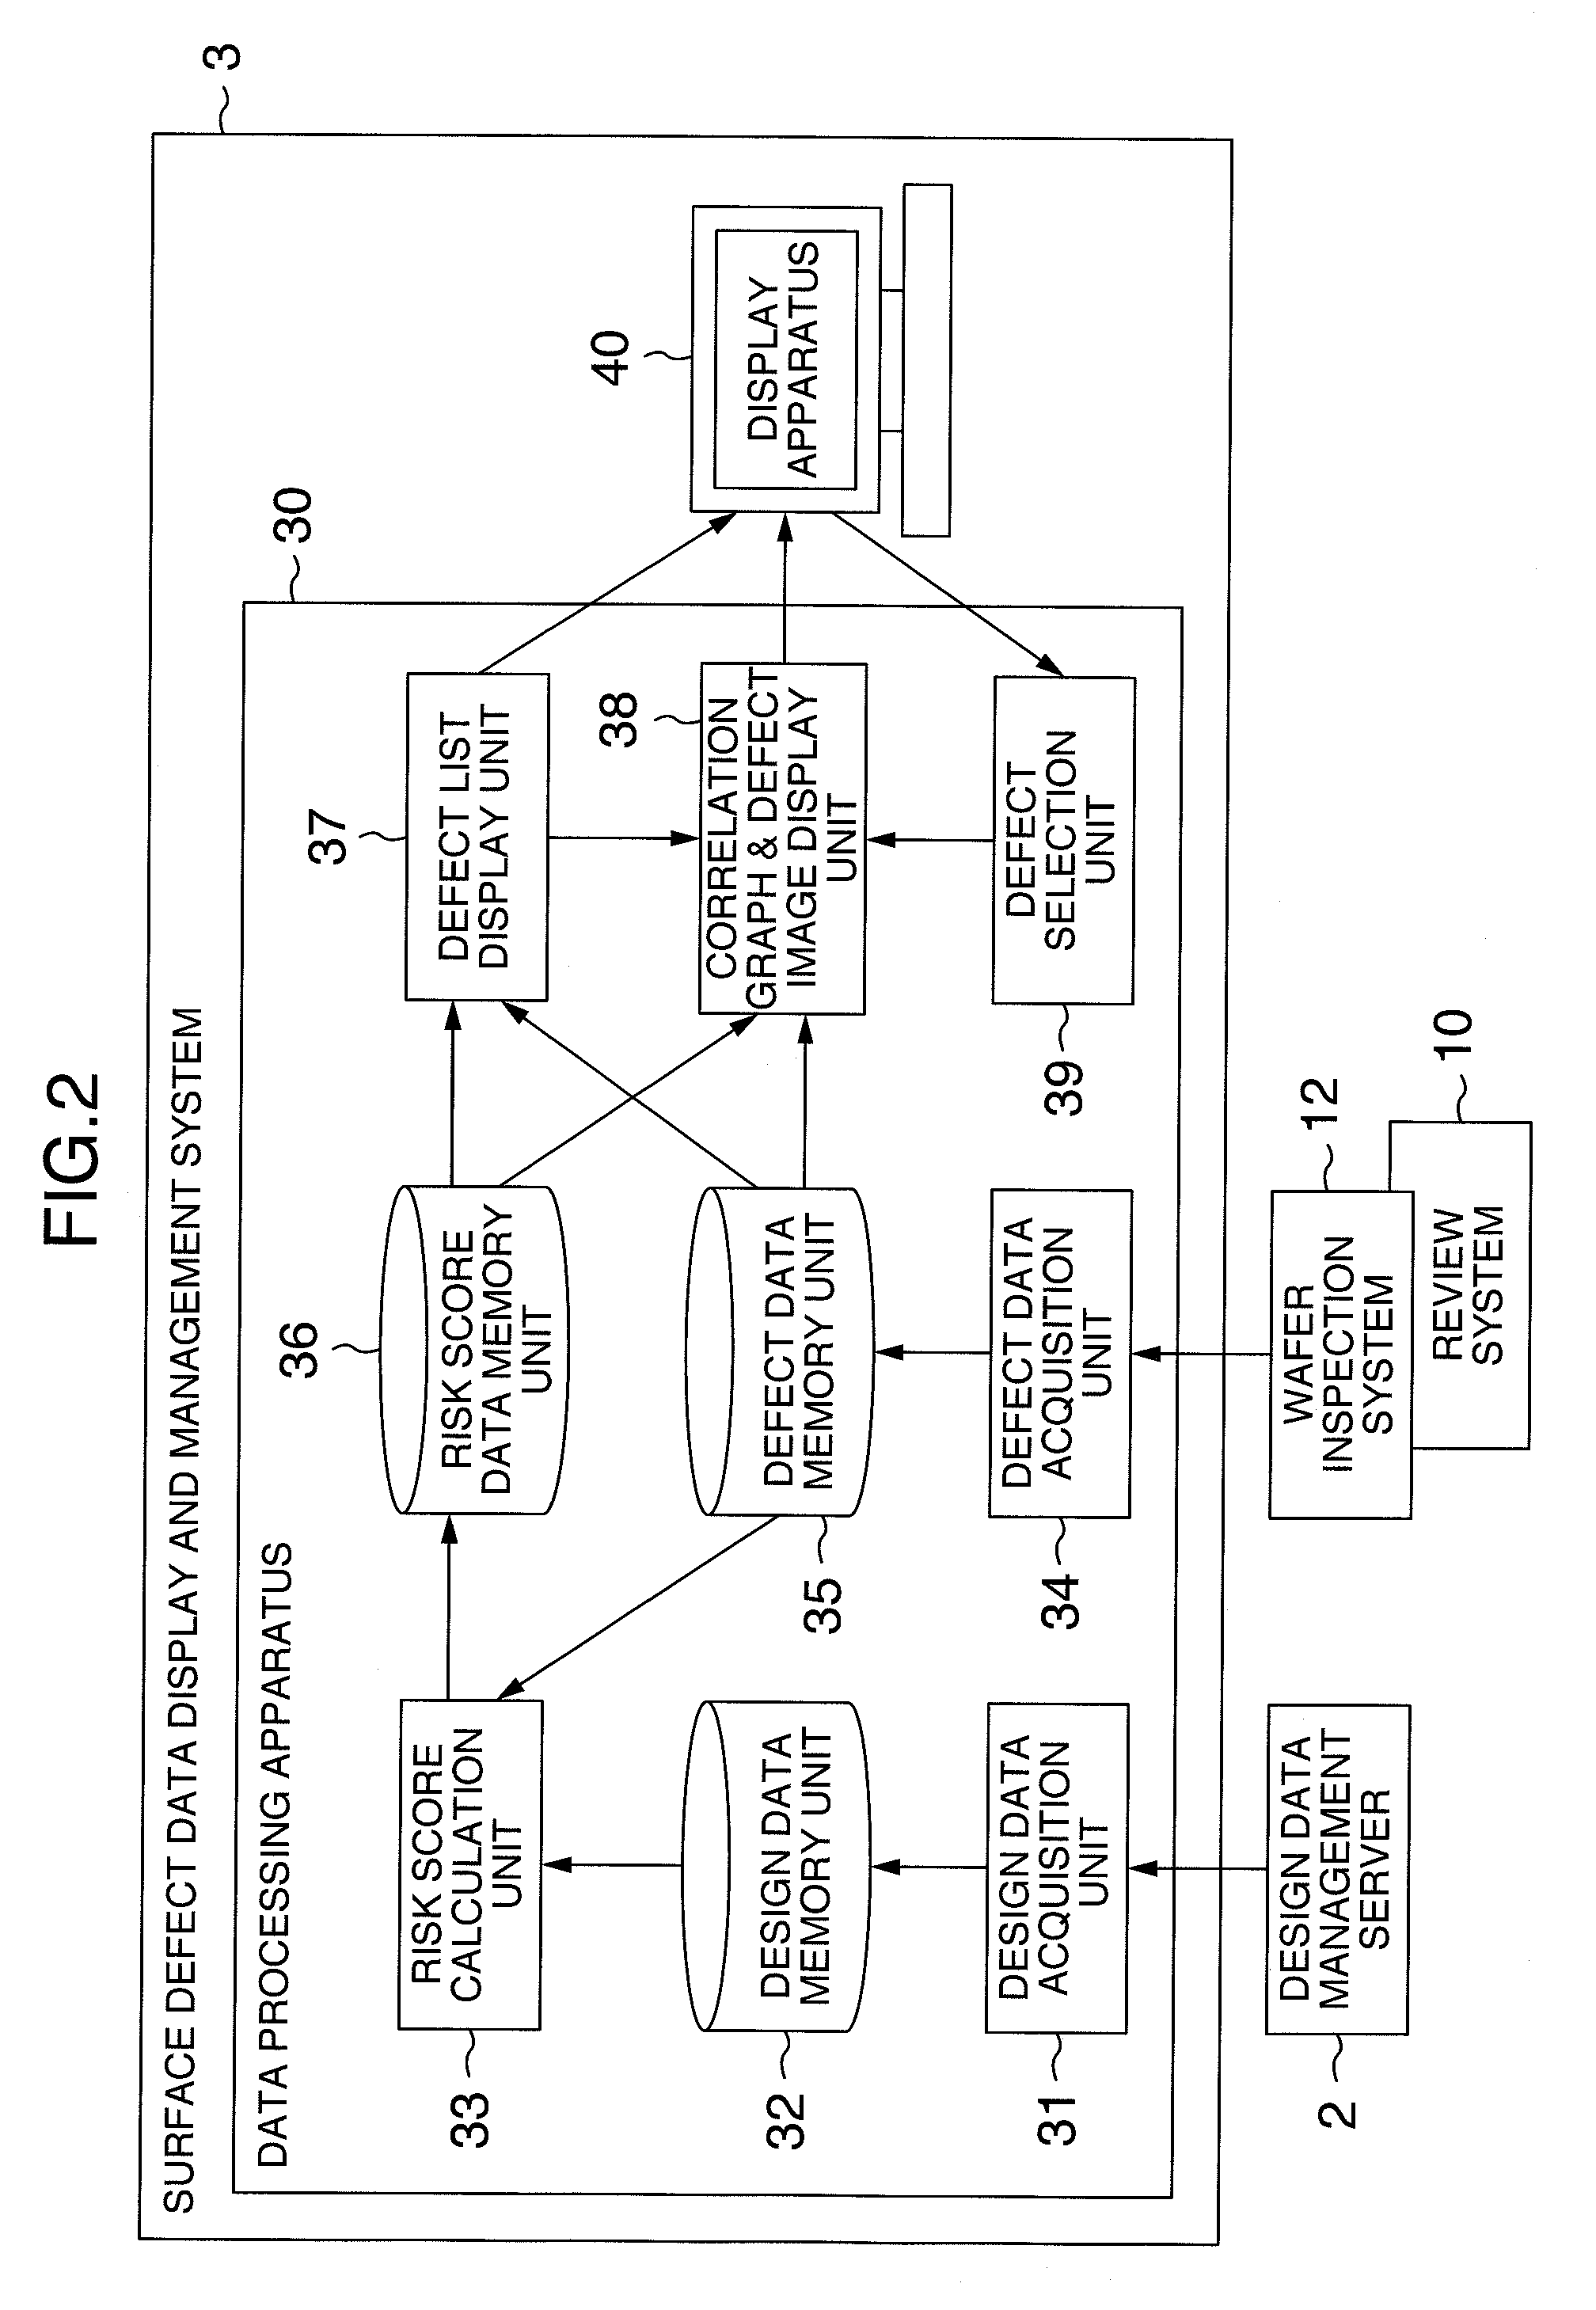 Surface defect data display and management system and a method of displaying and managing a surface defect data